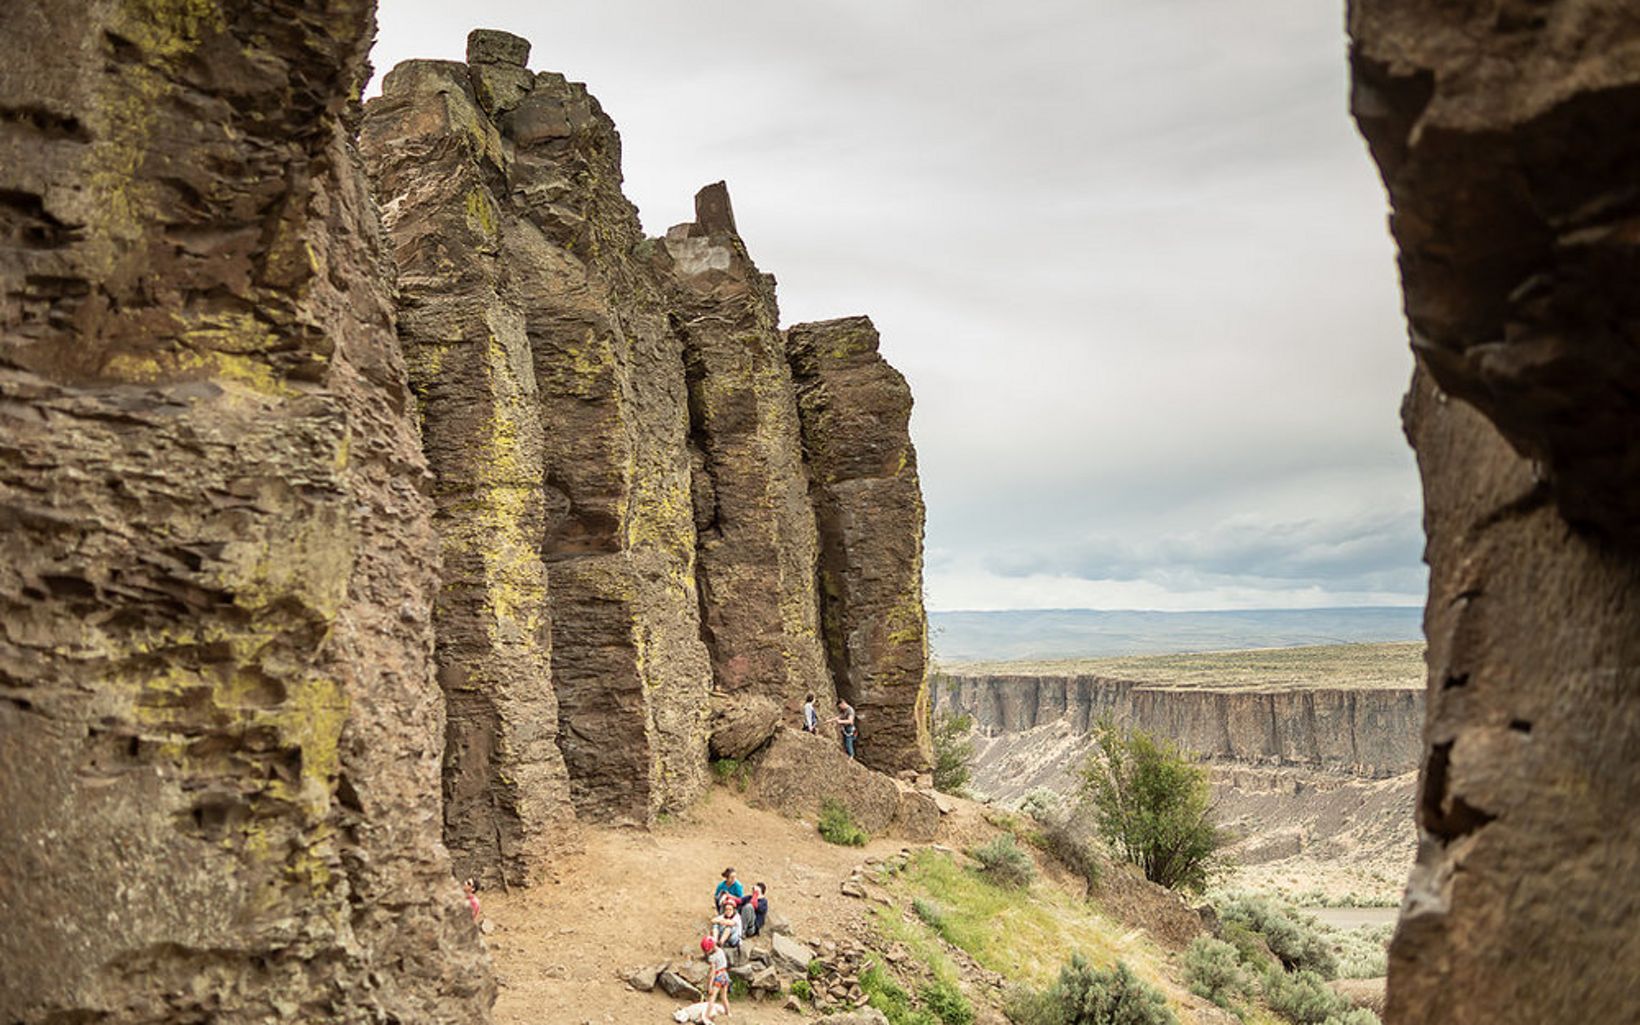 Climbers at Frenchman Coulee along the Columbia River near Vantage, Wash.